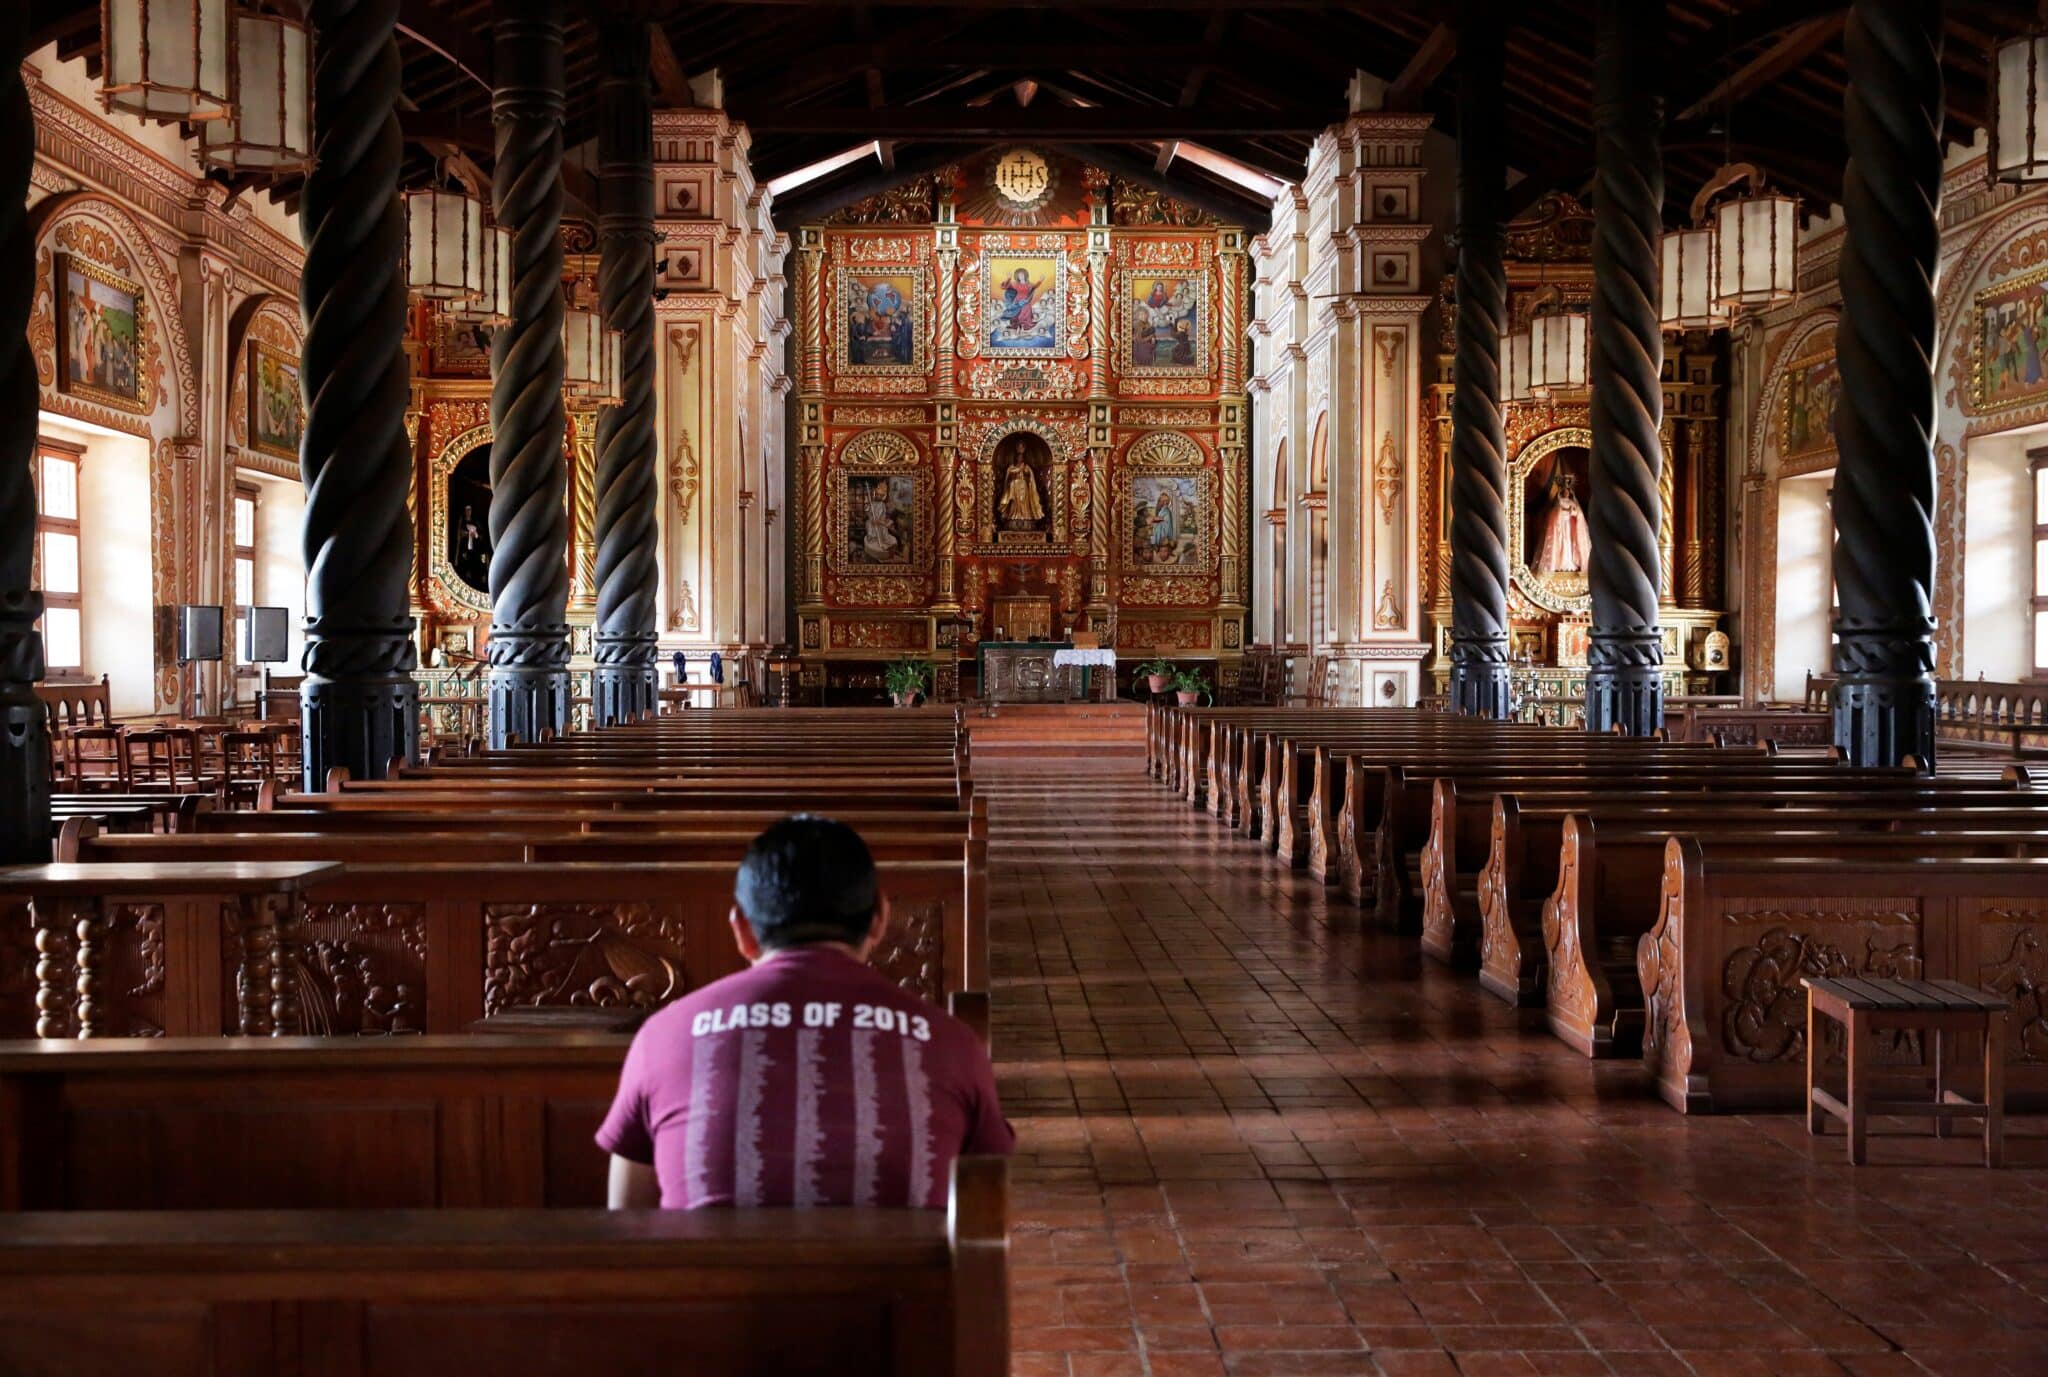 A devotee is seen in Immaculate Conception Cathedral in Concepcion, Bolivia, one of many historic Jesuit missionary sites within the country declared a World Heritage Site in 2019. (OSV News photo/David Mercado, Reuters)